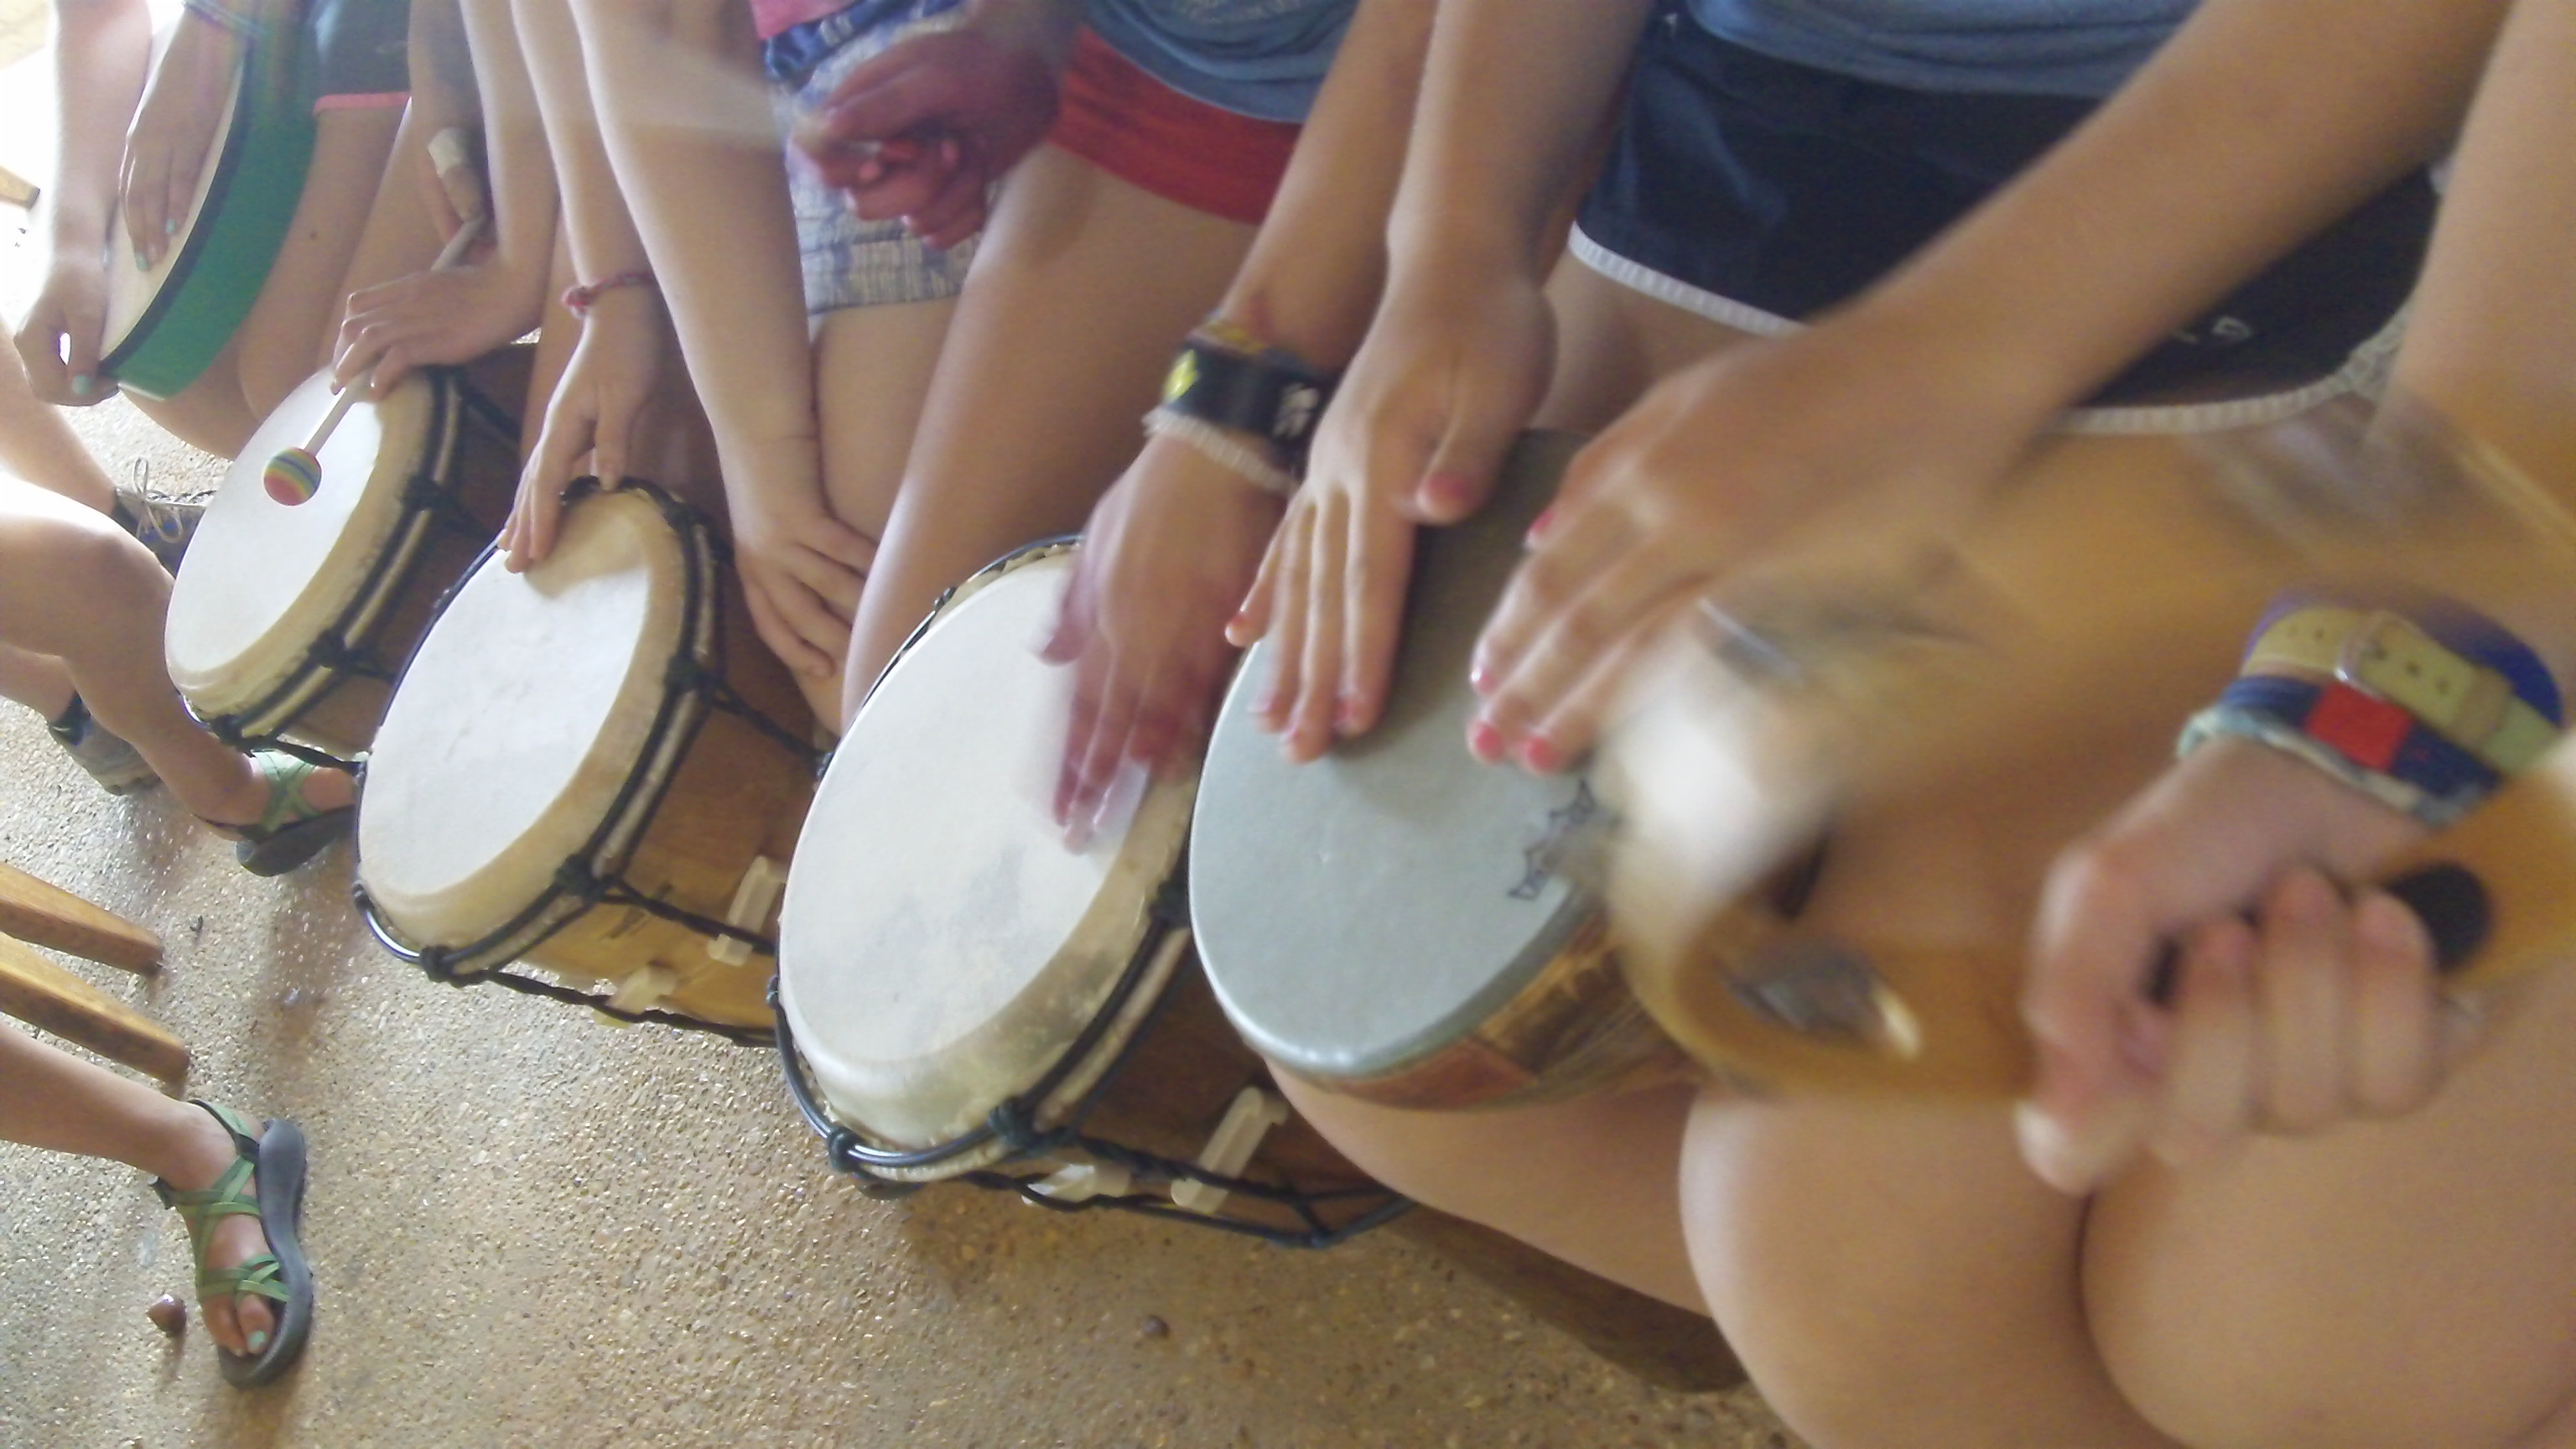 Beatin' Path brings drums & percussion for all participants and works to build community, one beat at a time.